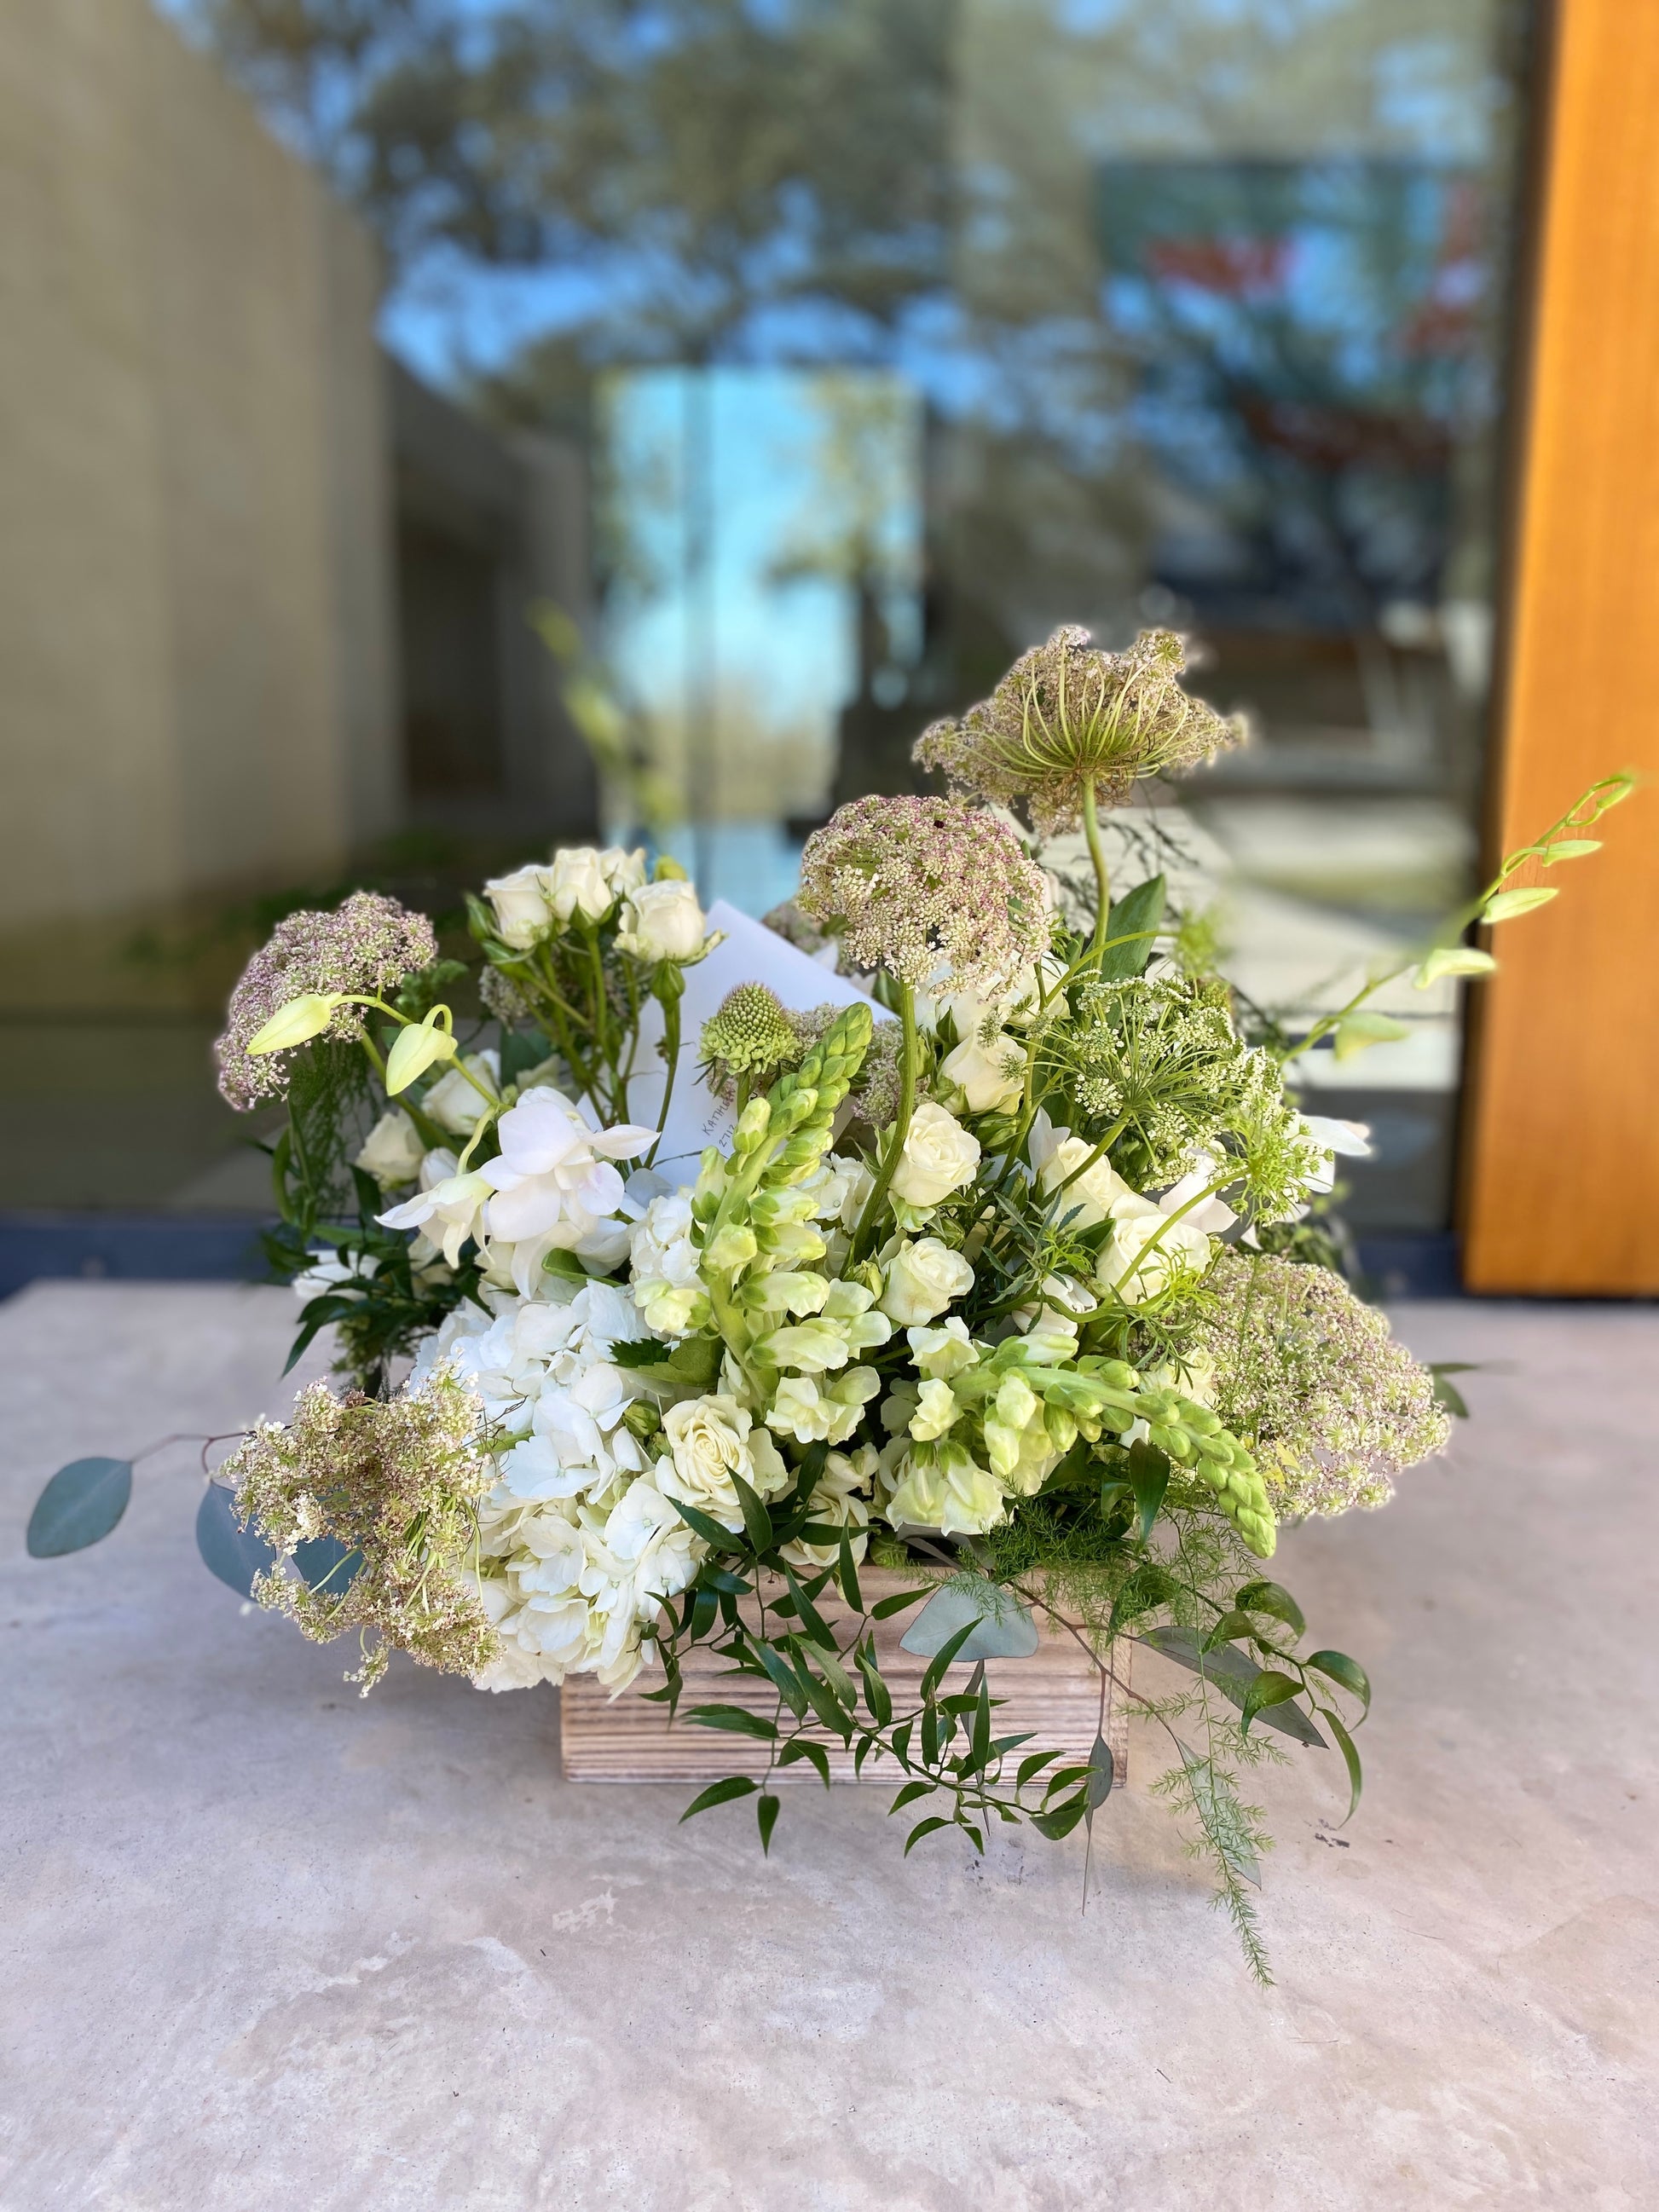 Real life image of Delivery of Barton Creek Gardens box garden of white and green flowers in front of modern glass door